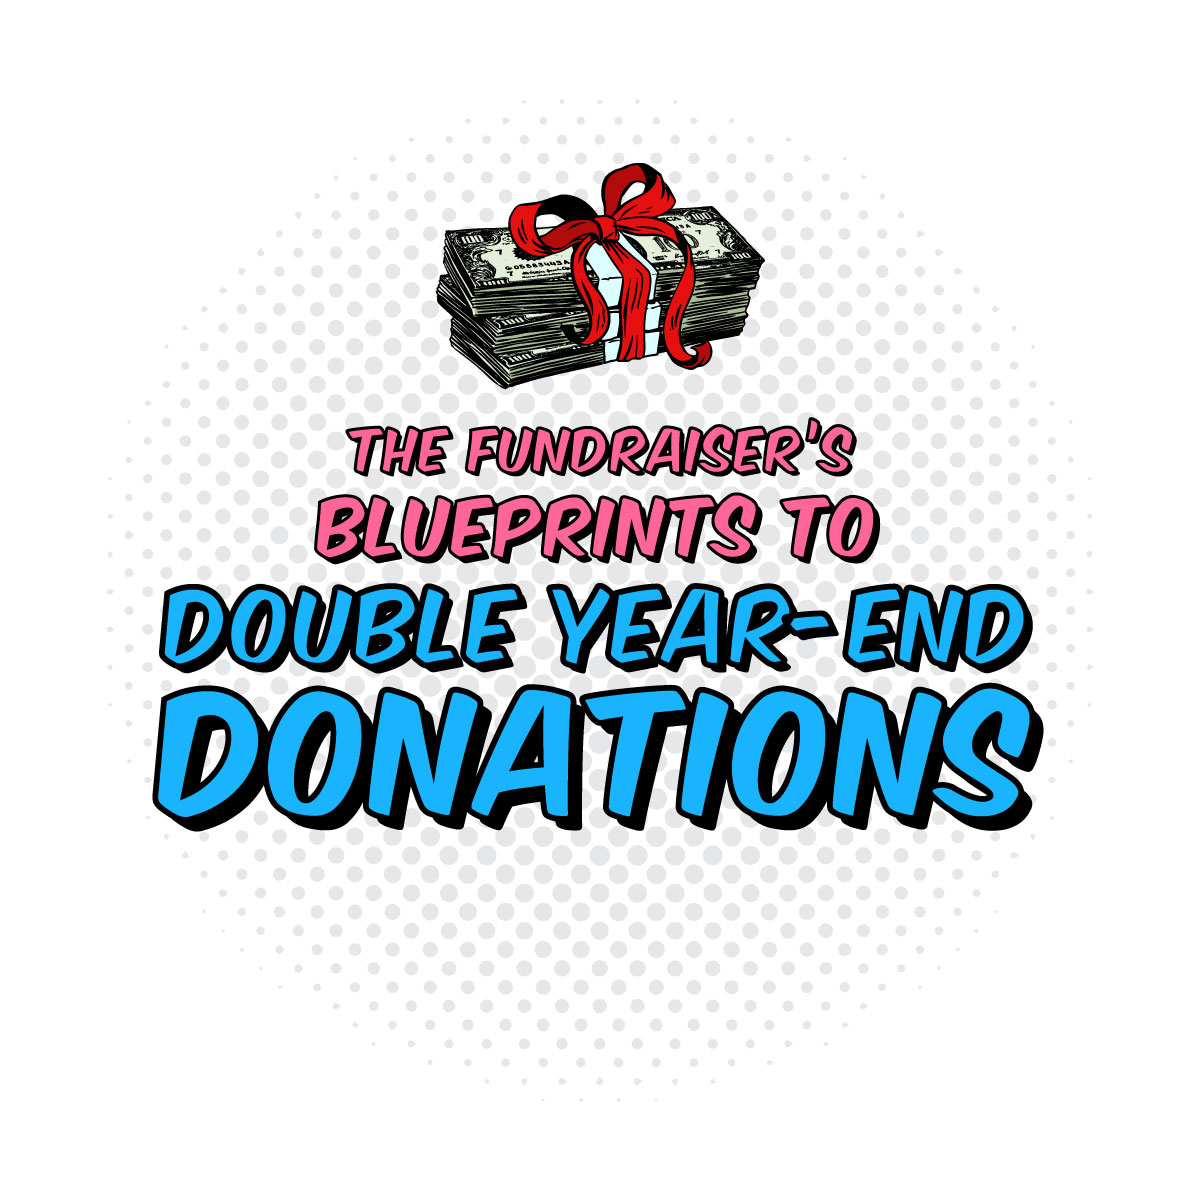 The Fundraiser’s Blueprint to Double Year-End Donations